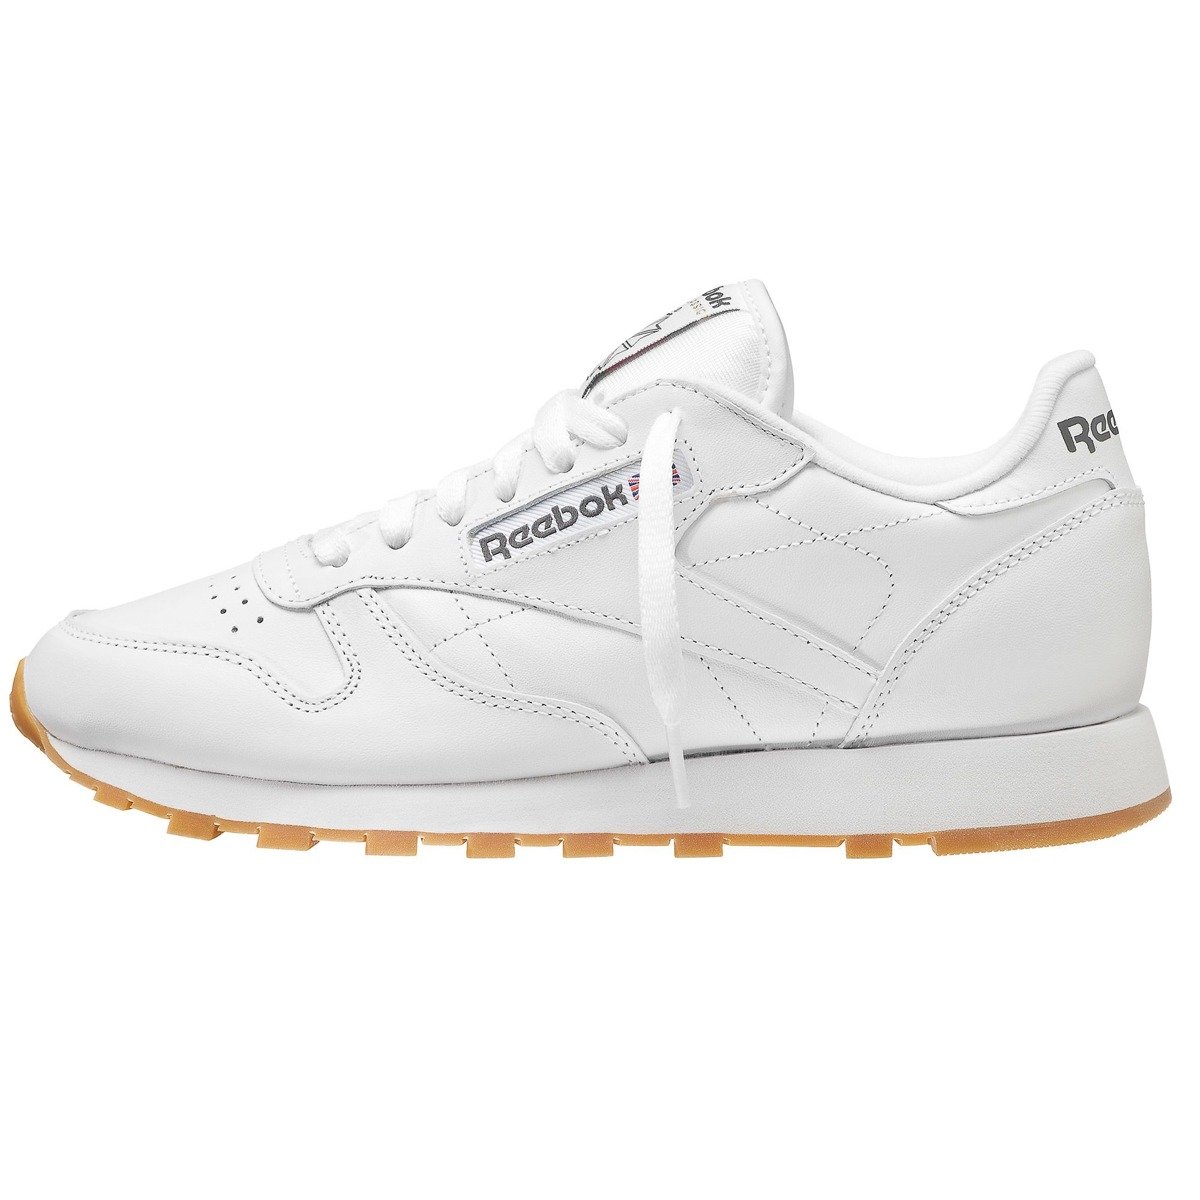 Reebok Classic Leather - 49799 Intense White/Gum | Shoes \ Casual Shoes ...